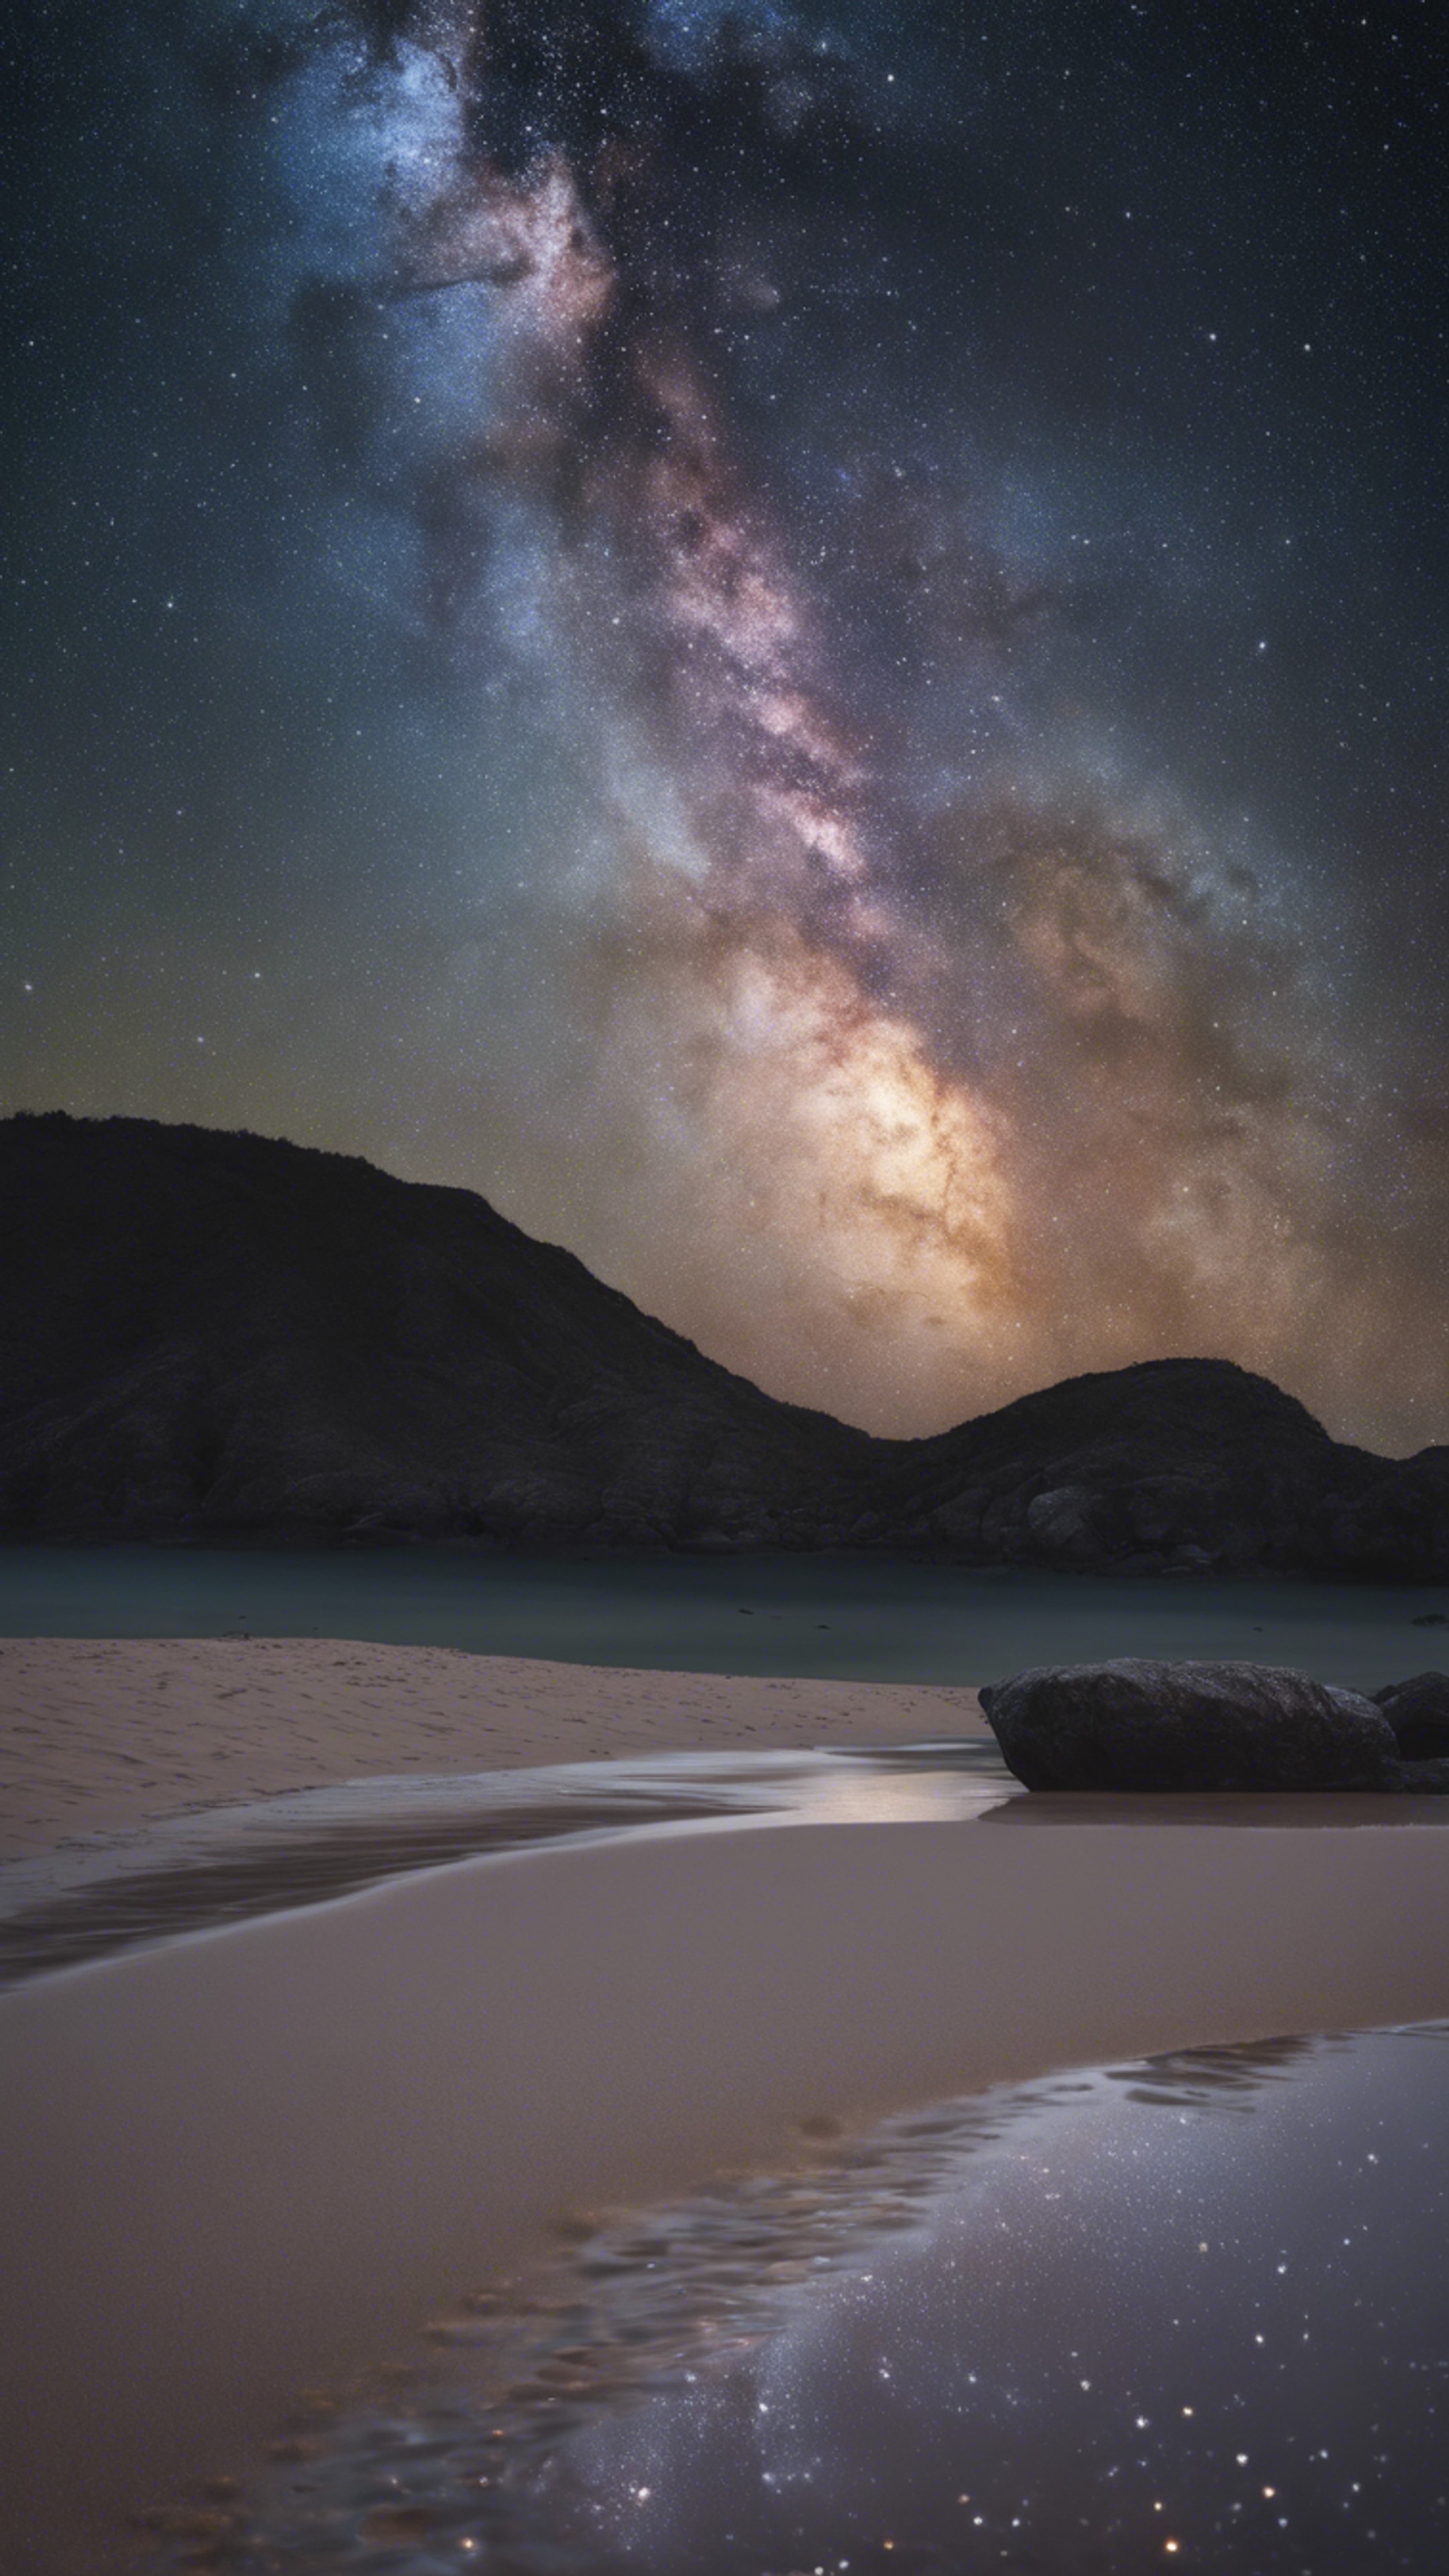 View of the Milky Way Galaxy across a dark starry night sky as seen from a deserted beach. Papel de parede[ccd5588141b94e439f84]